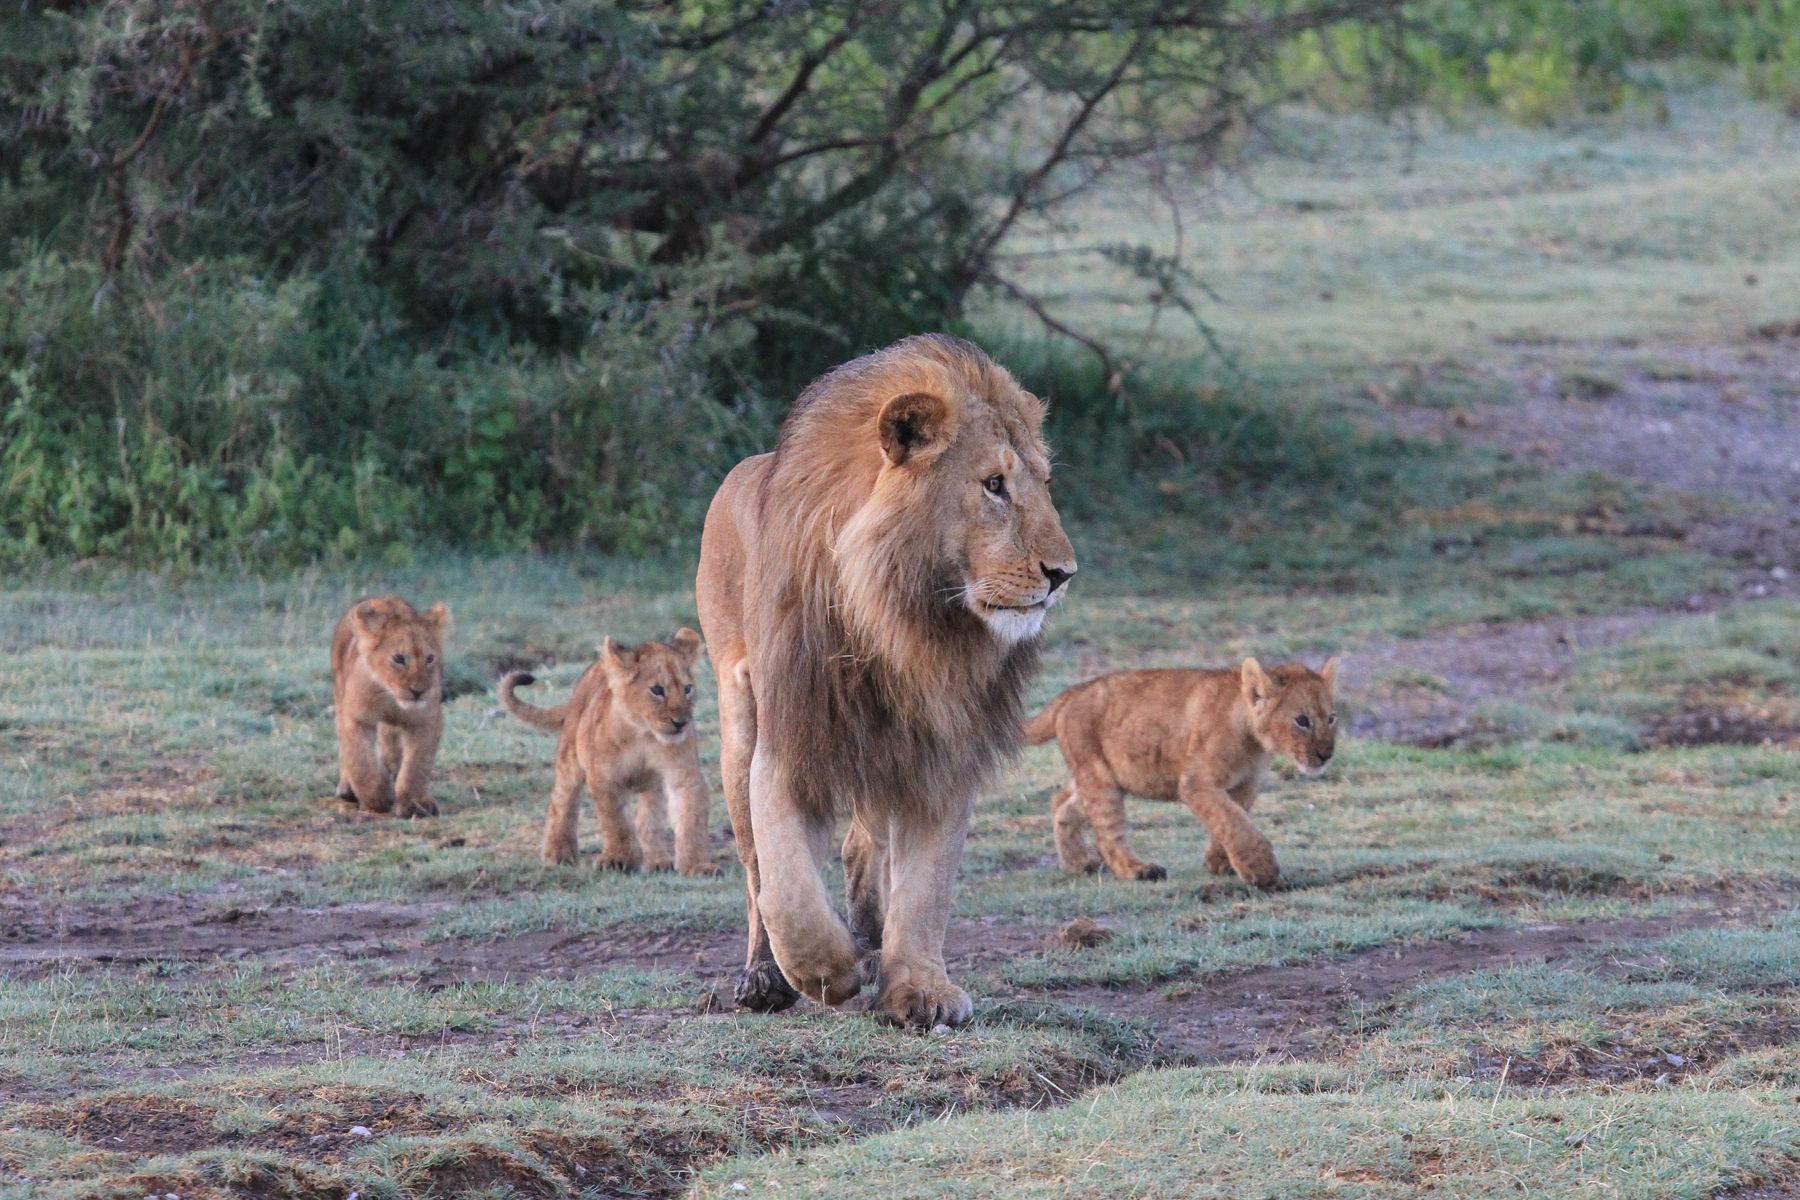 Or simply follow dad around like grown up Lions